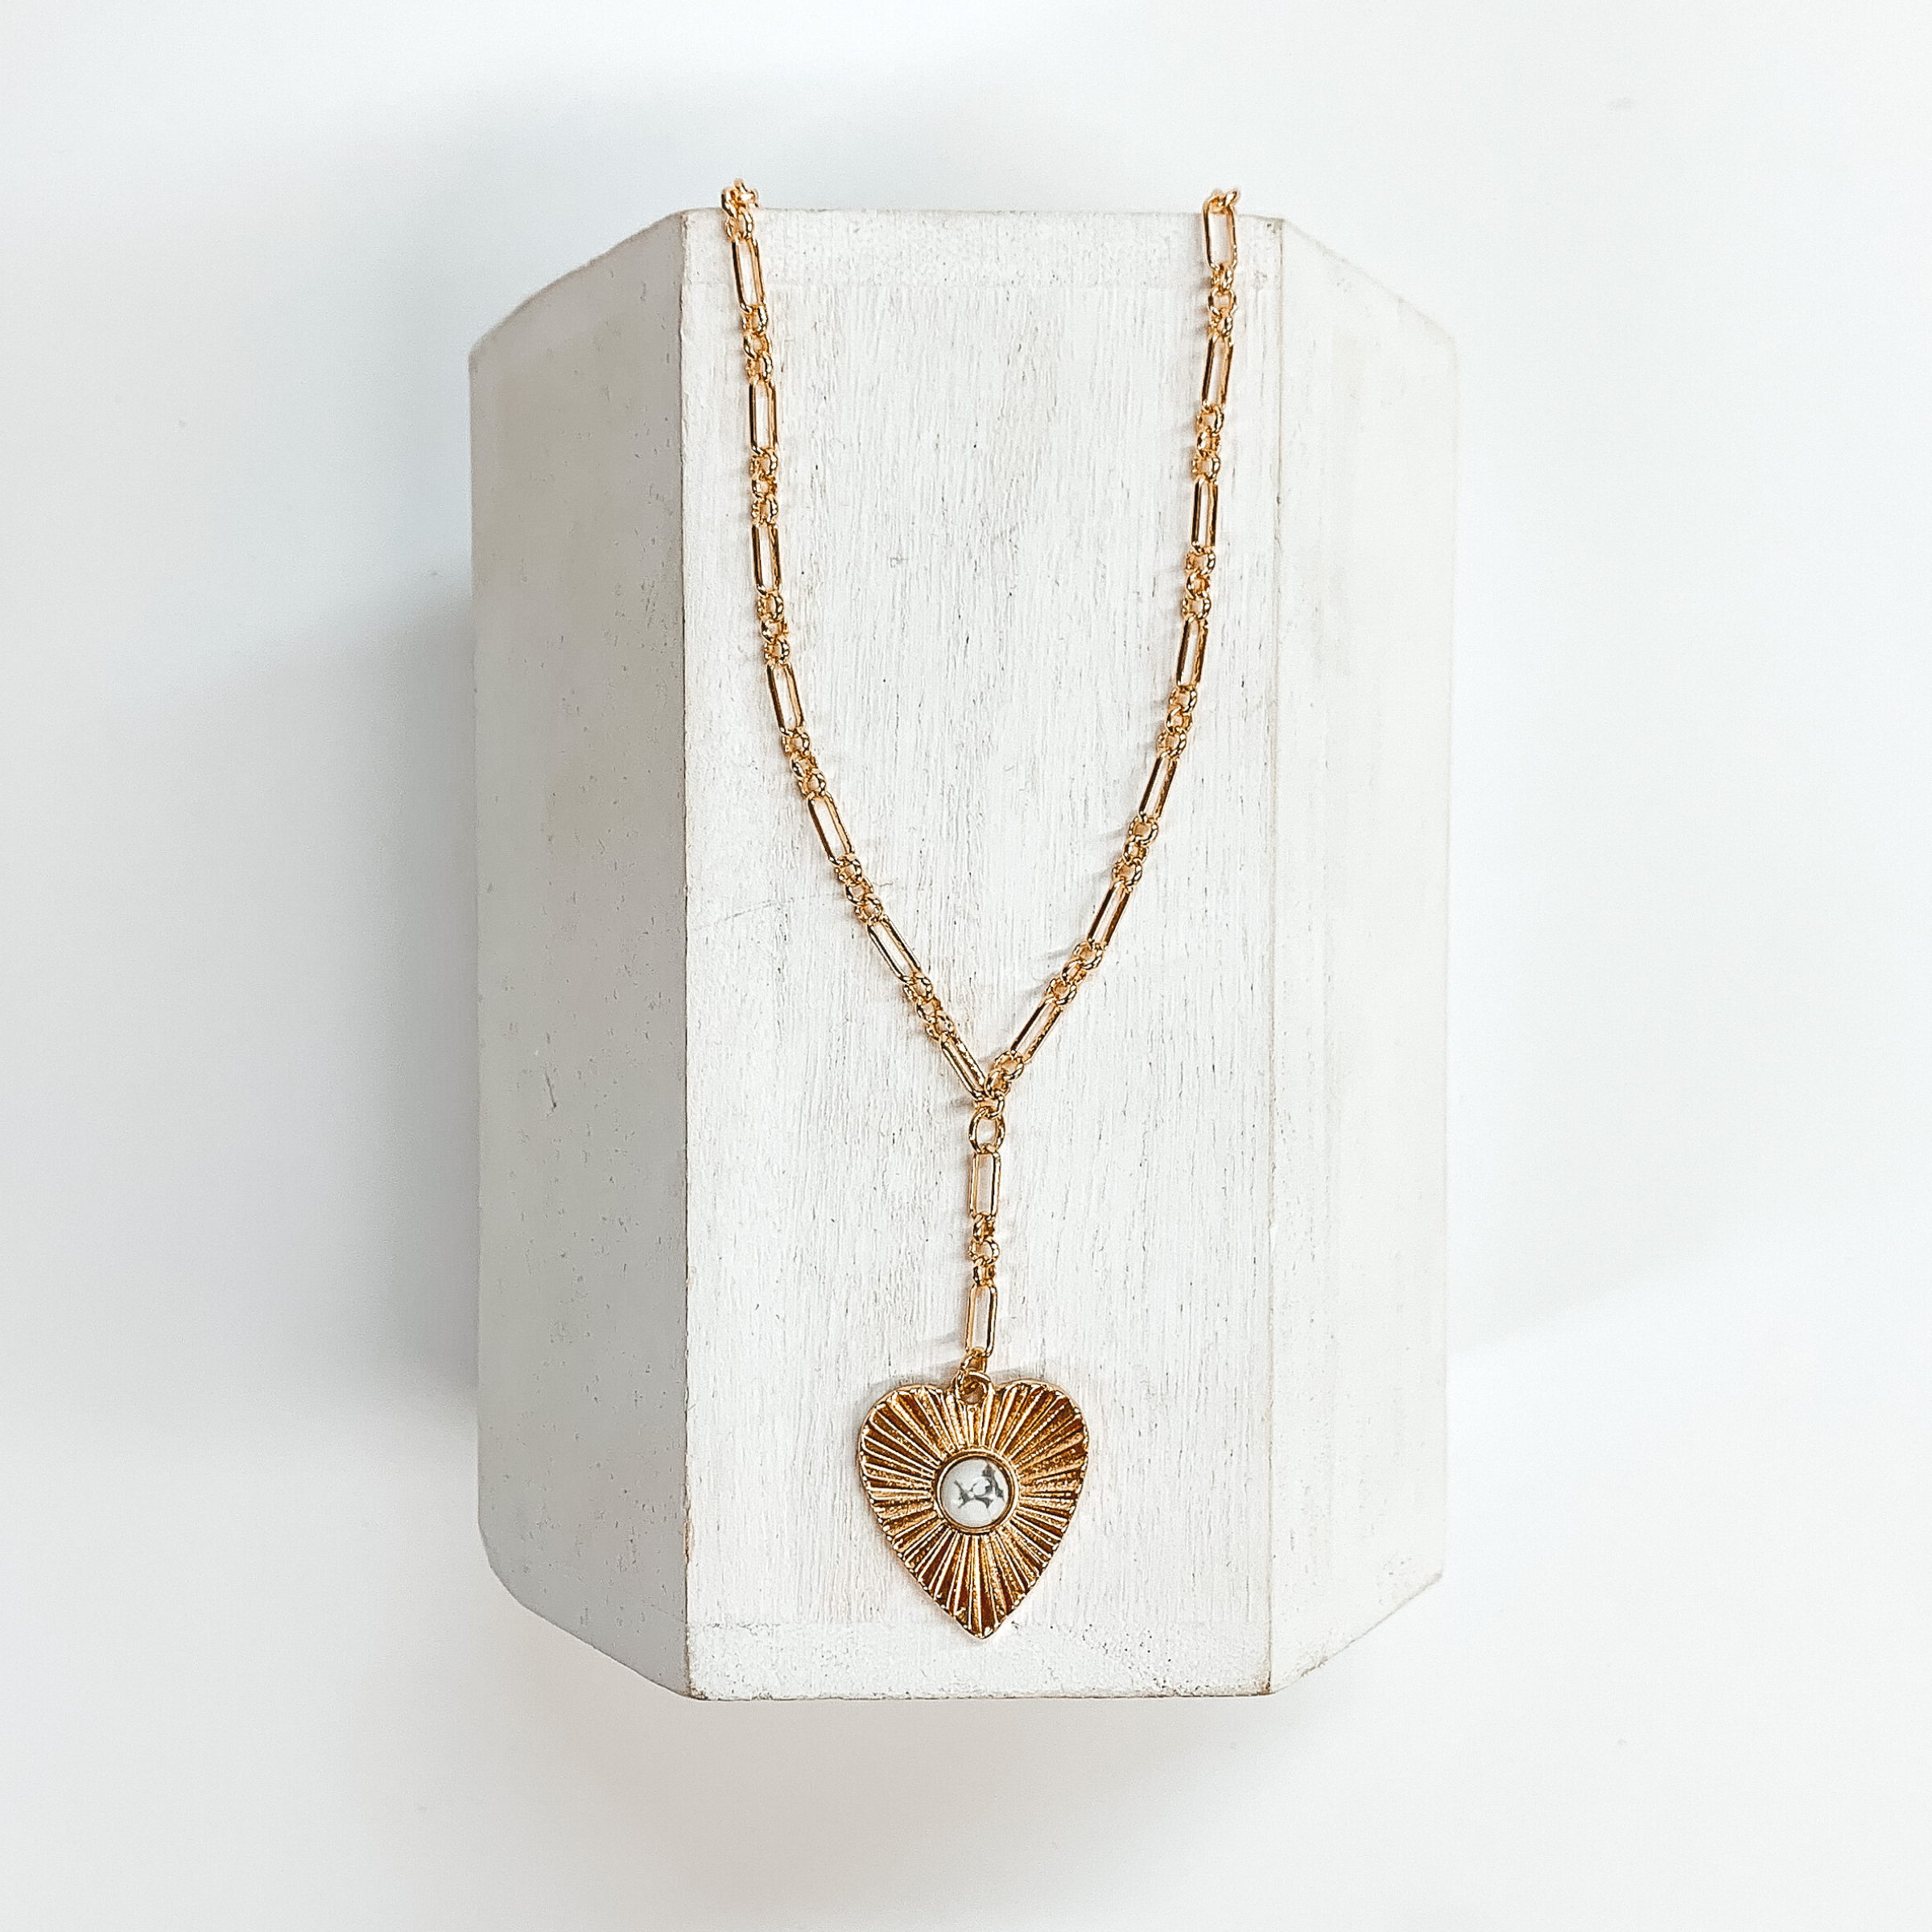 Gold linked chain with a sunburst heart pendant with a small white stone  in the center. This necklace is taken on a white block and on a white  background.